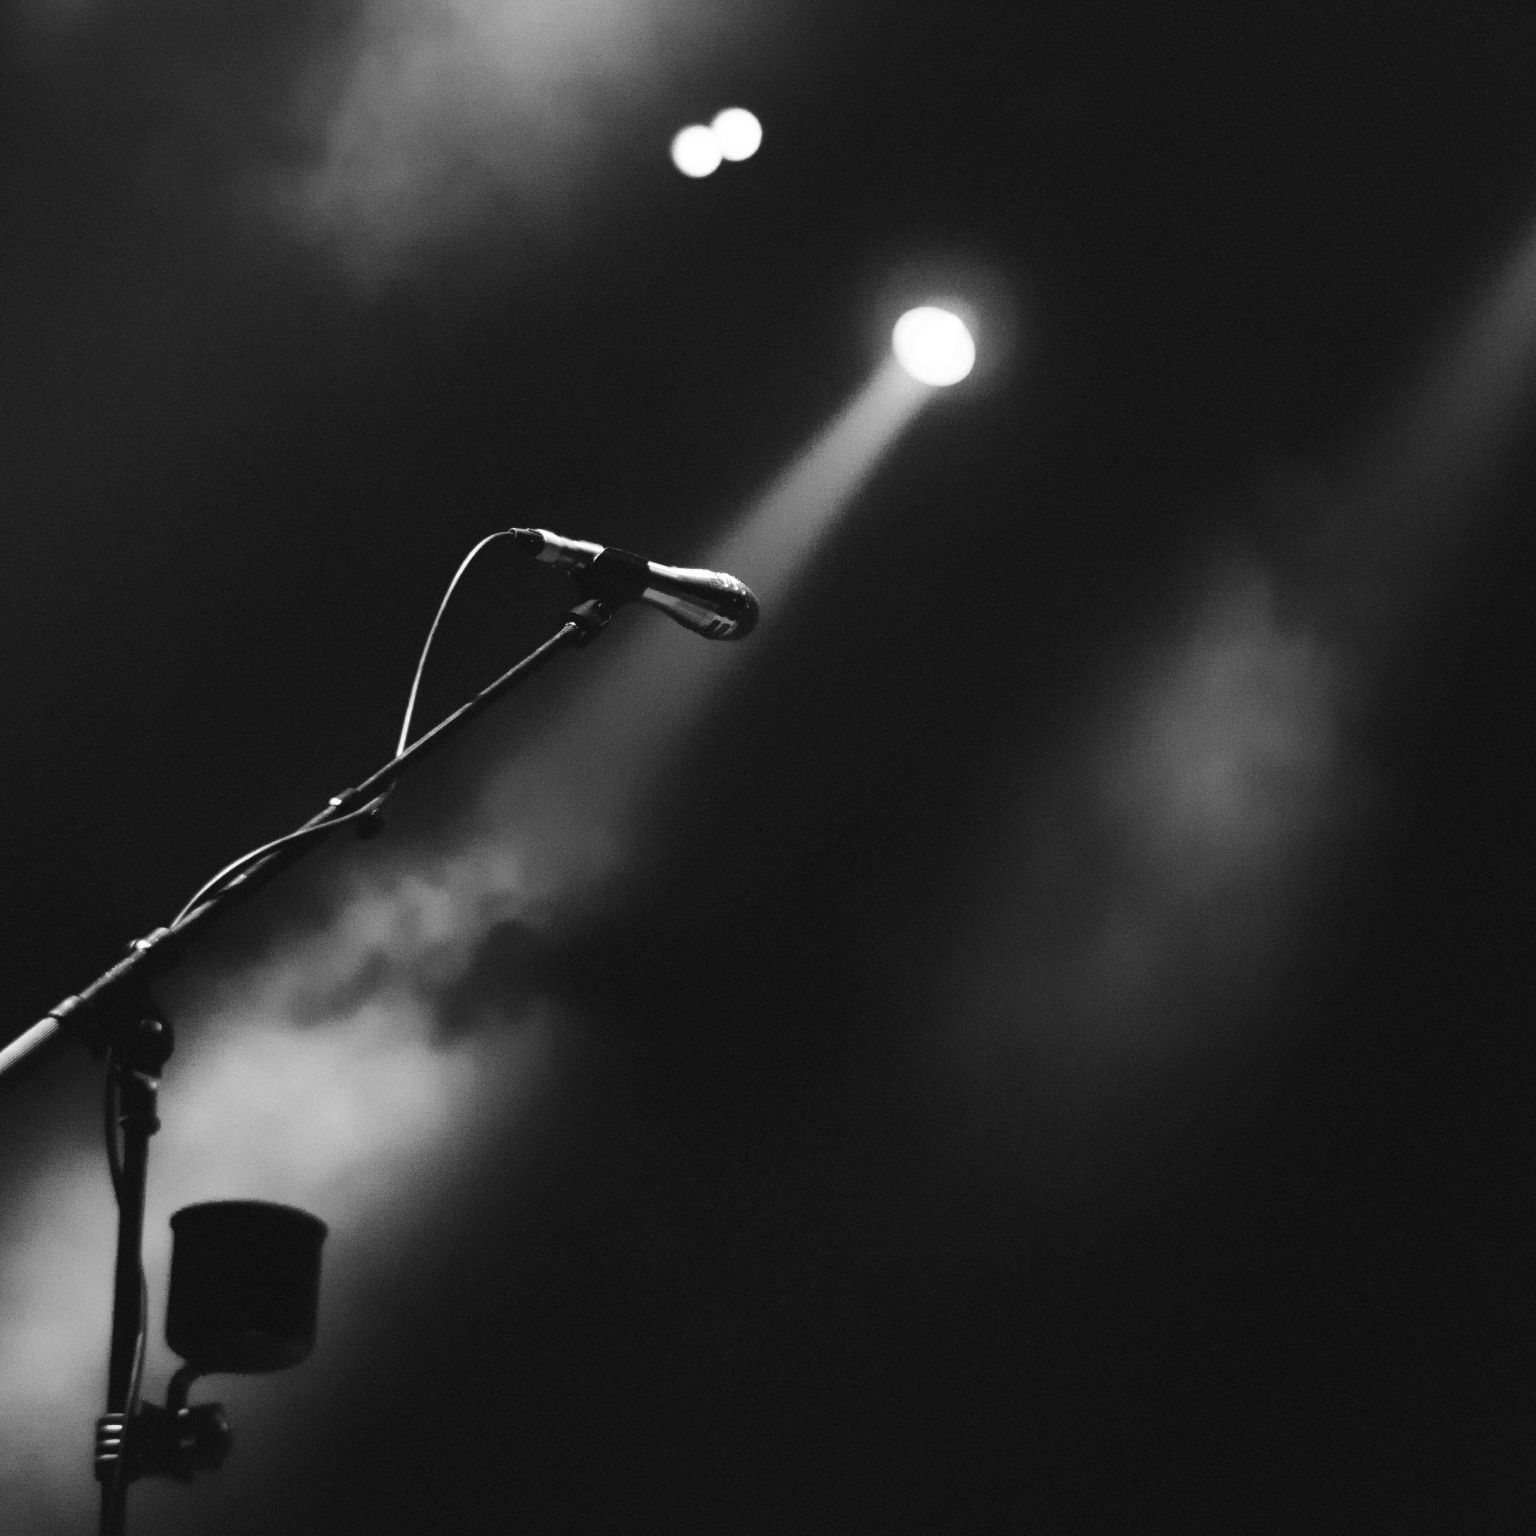 A lone mic in black and white on stage with dry ice and spotlights.